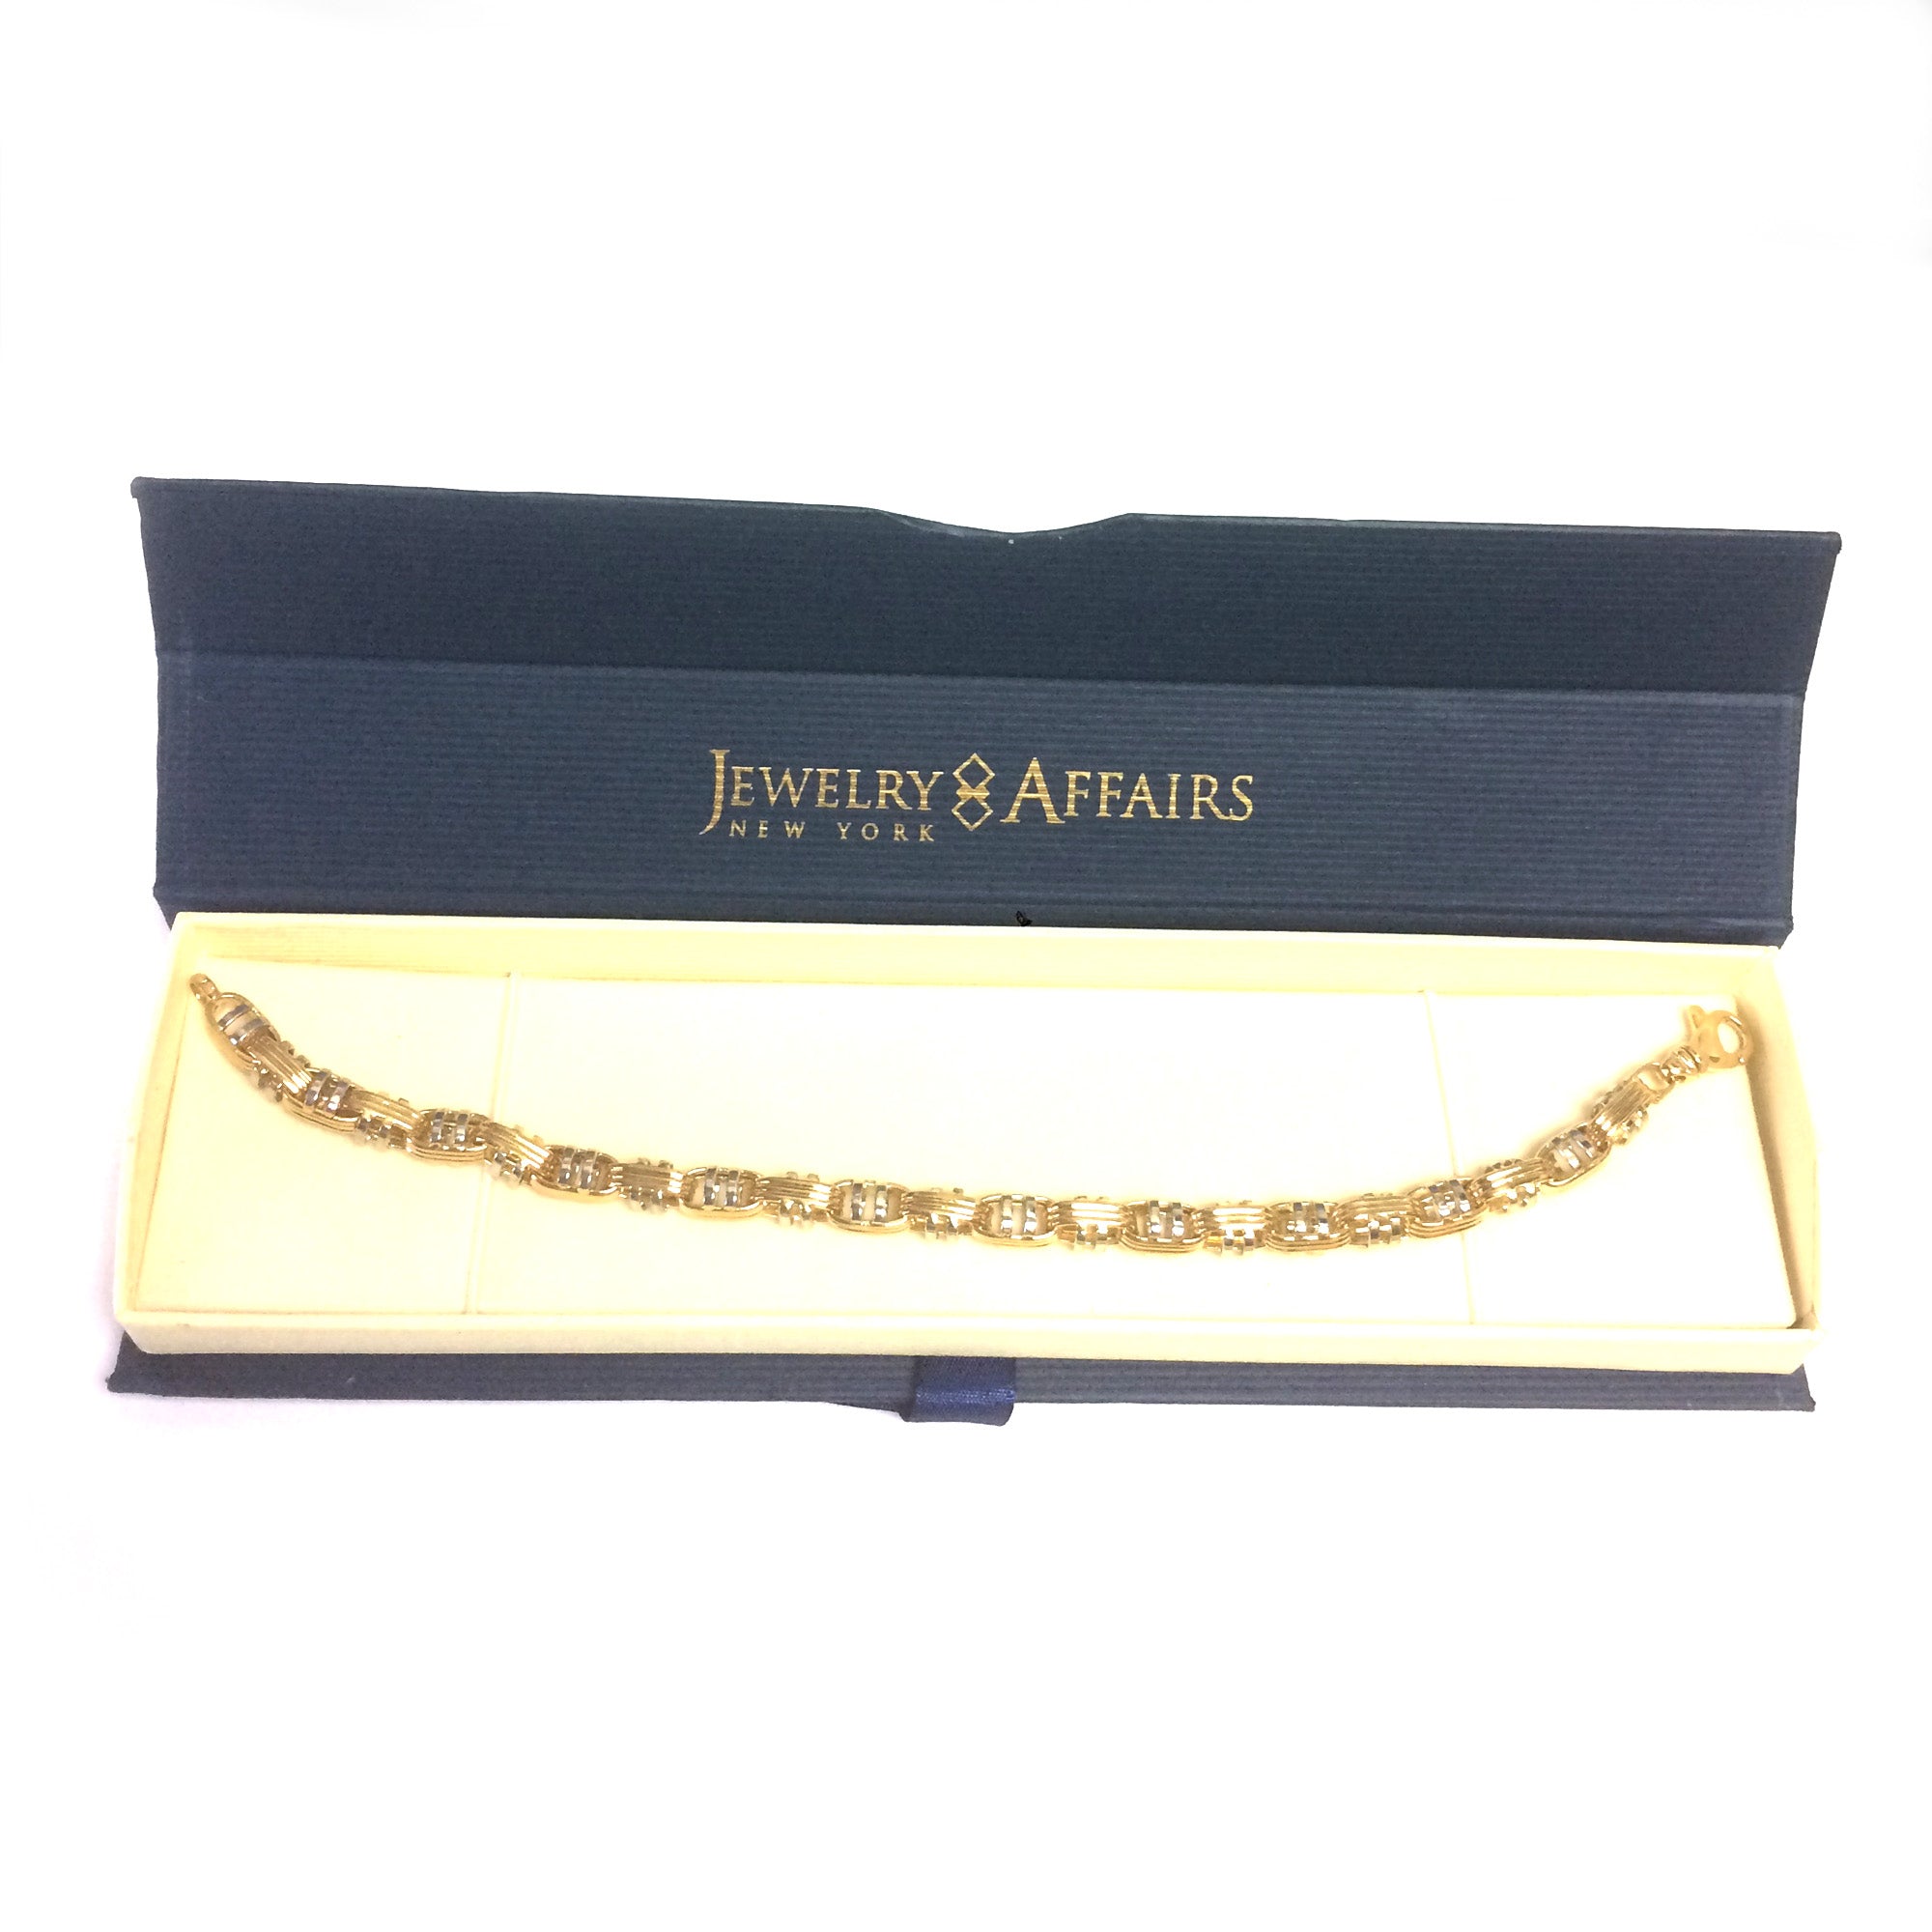 14k Yellow And White Gold Double Mariner Mens Bracelet, 8.5"